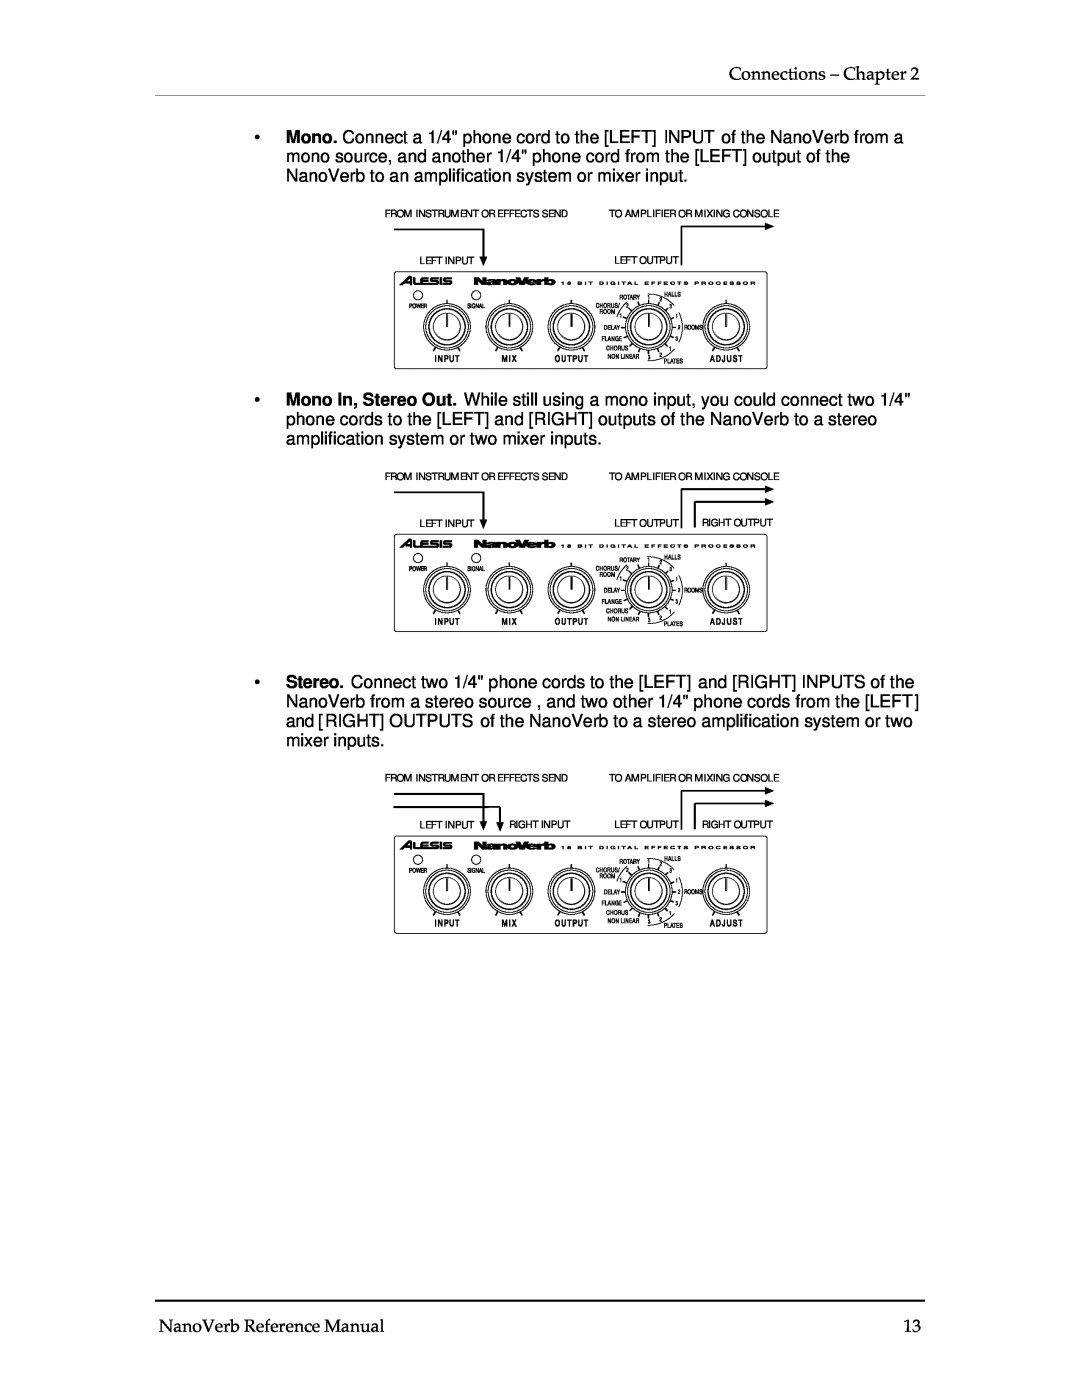 Alesis Stereo Amplifier Connections - Chapter, NanoVerb Reference Manual, From Instrument Or Effects Send, Left Input 